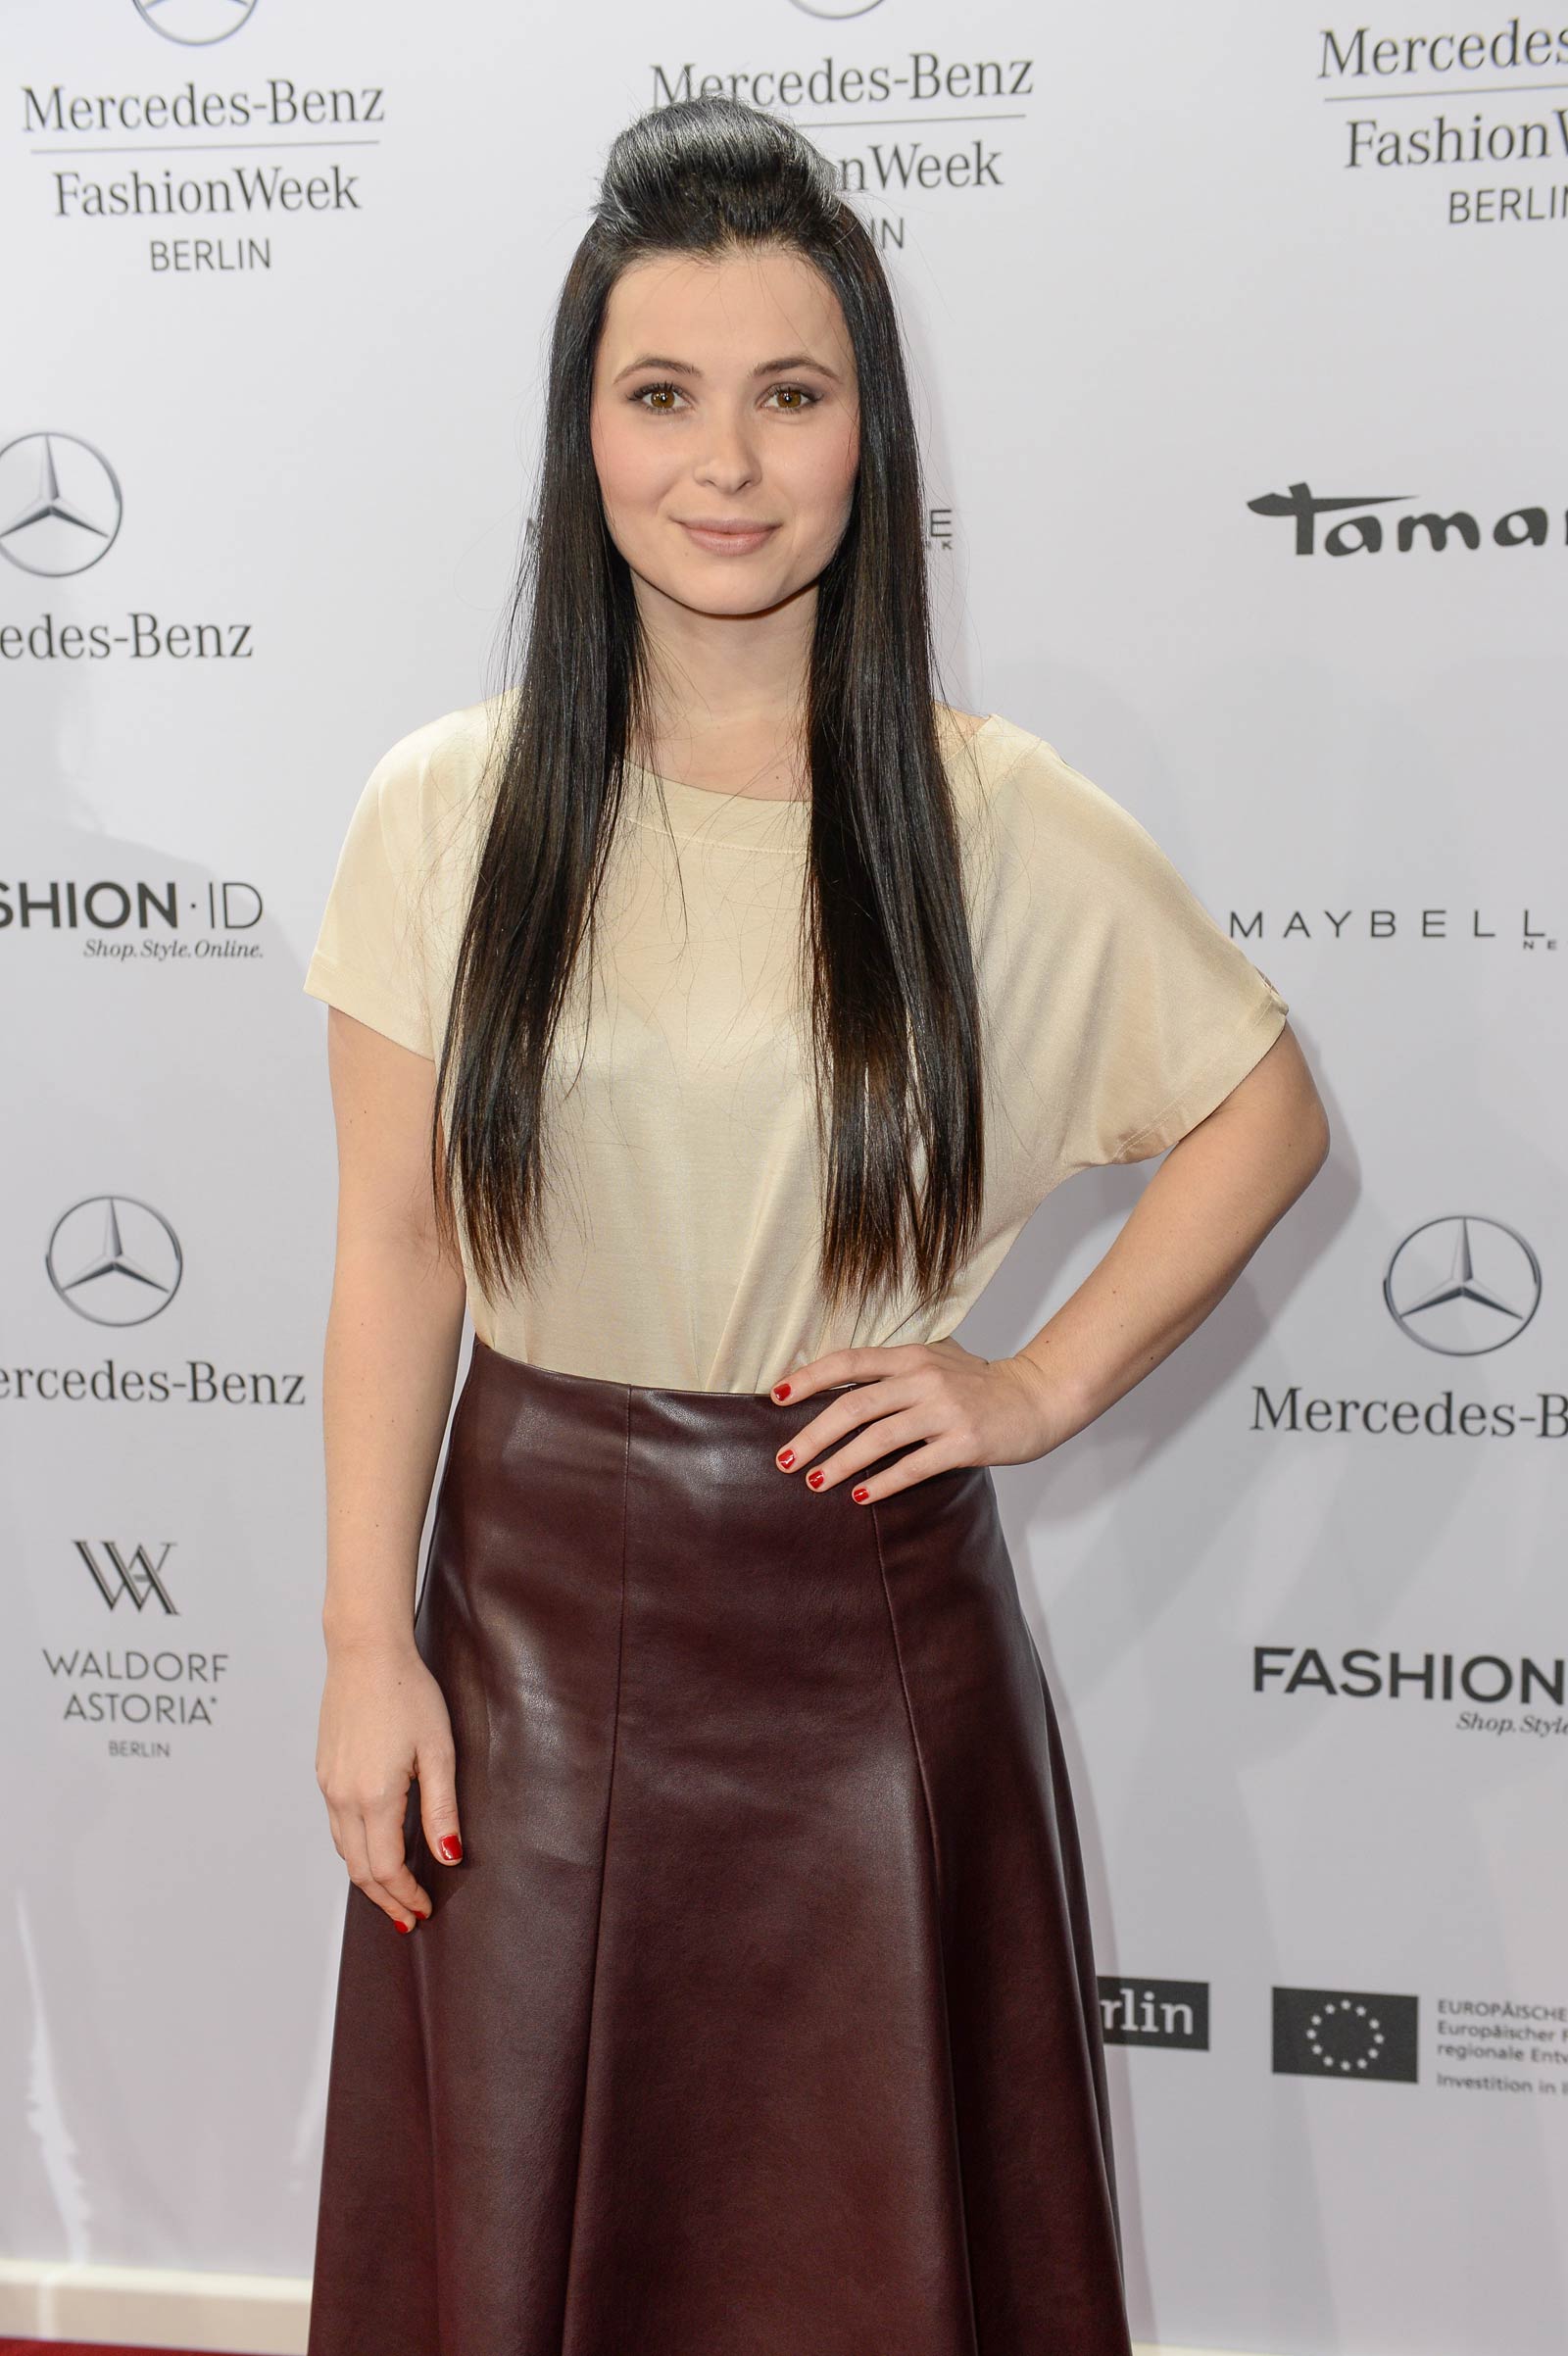 Other german celebrities attend Merceses Benz Fashion Week